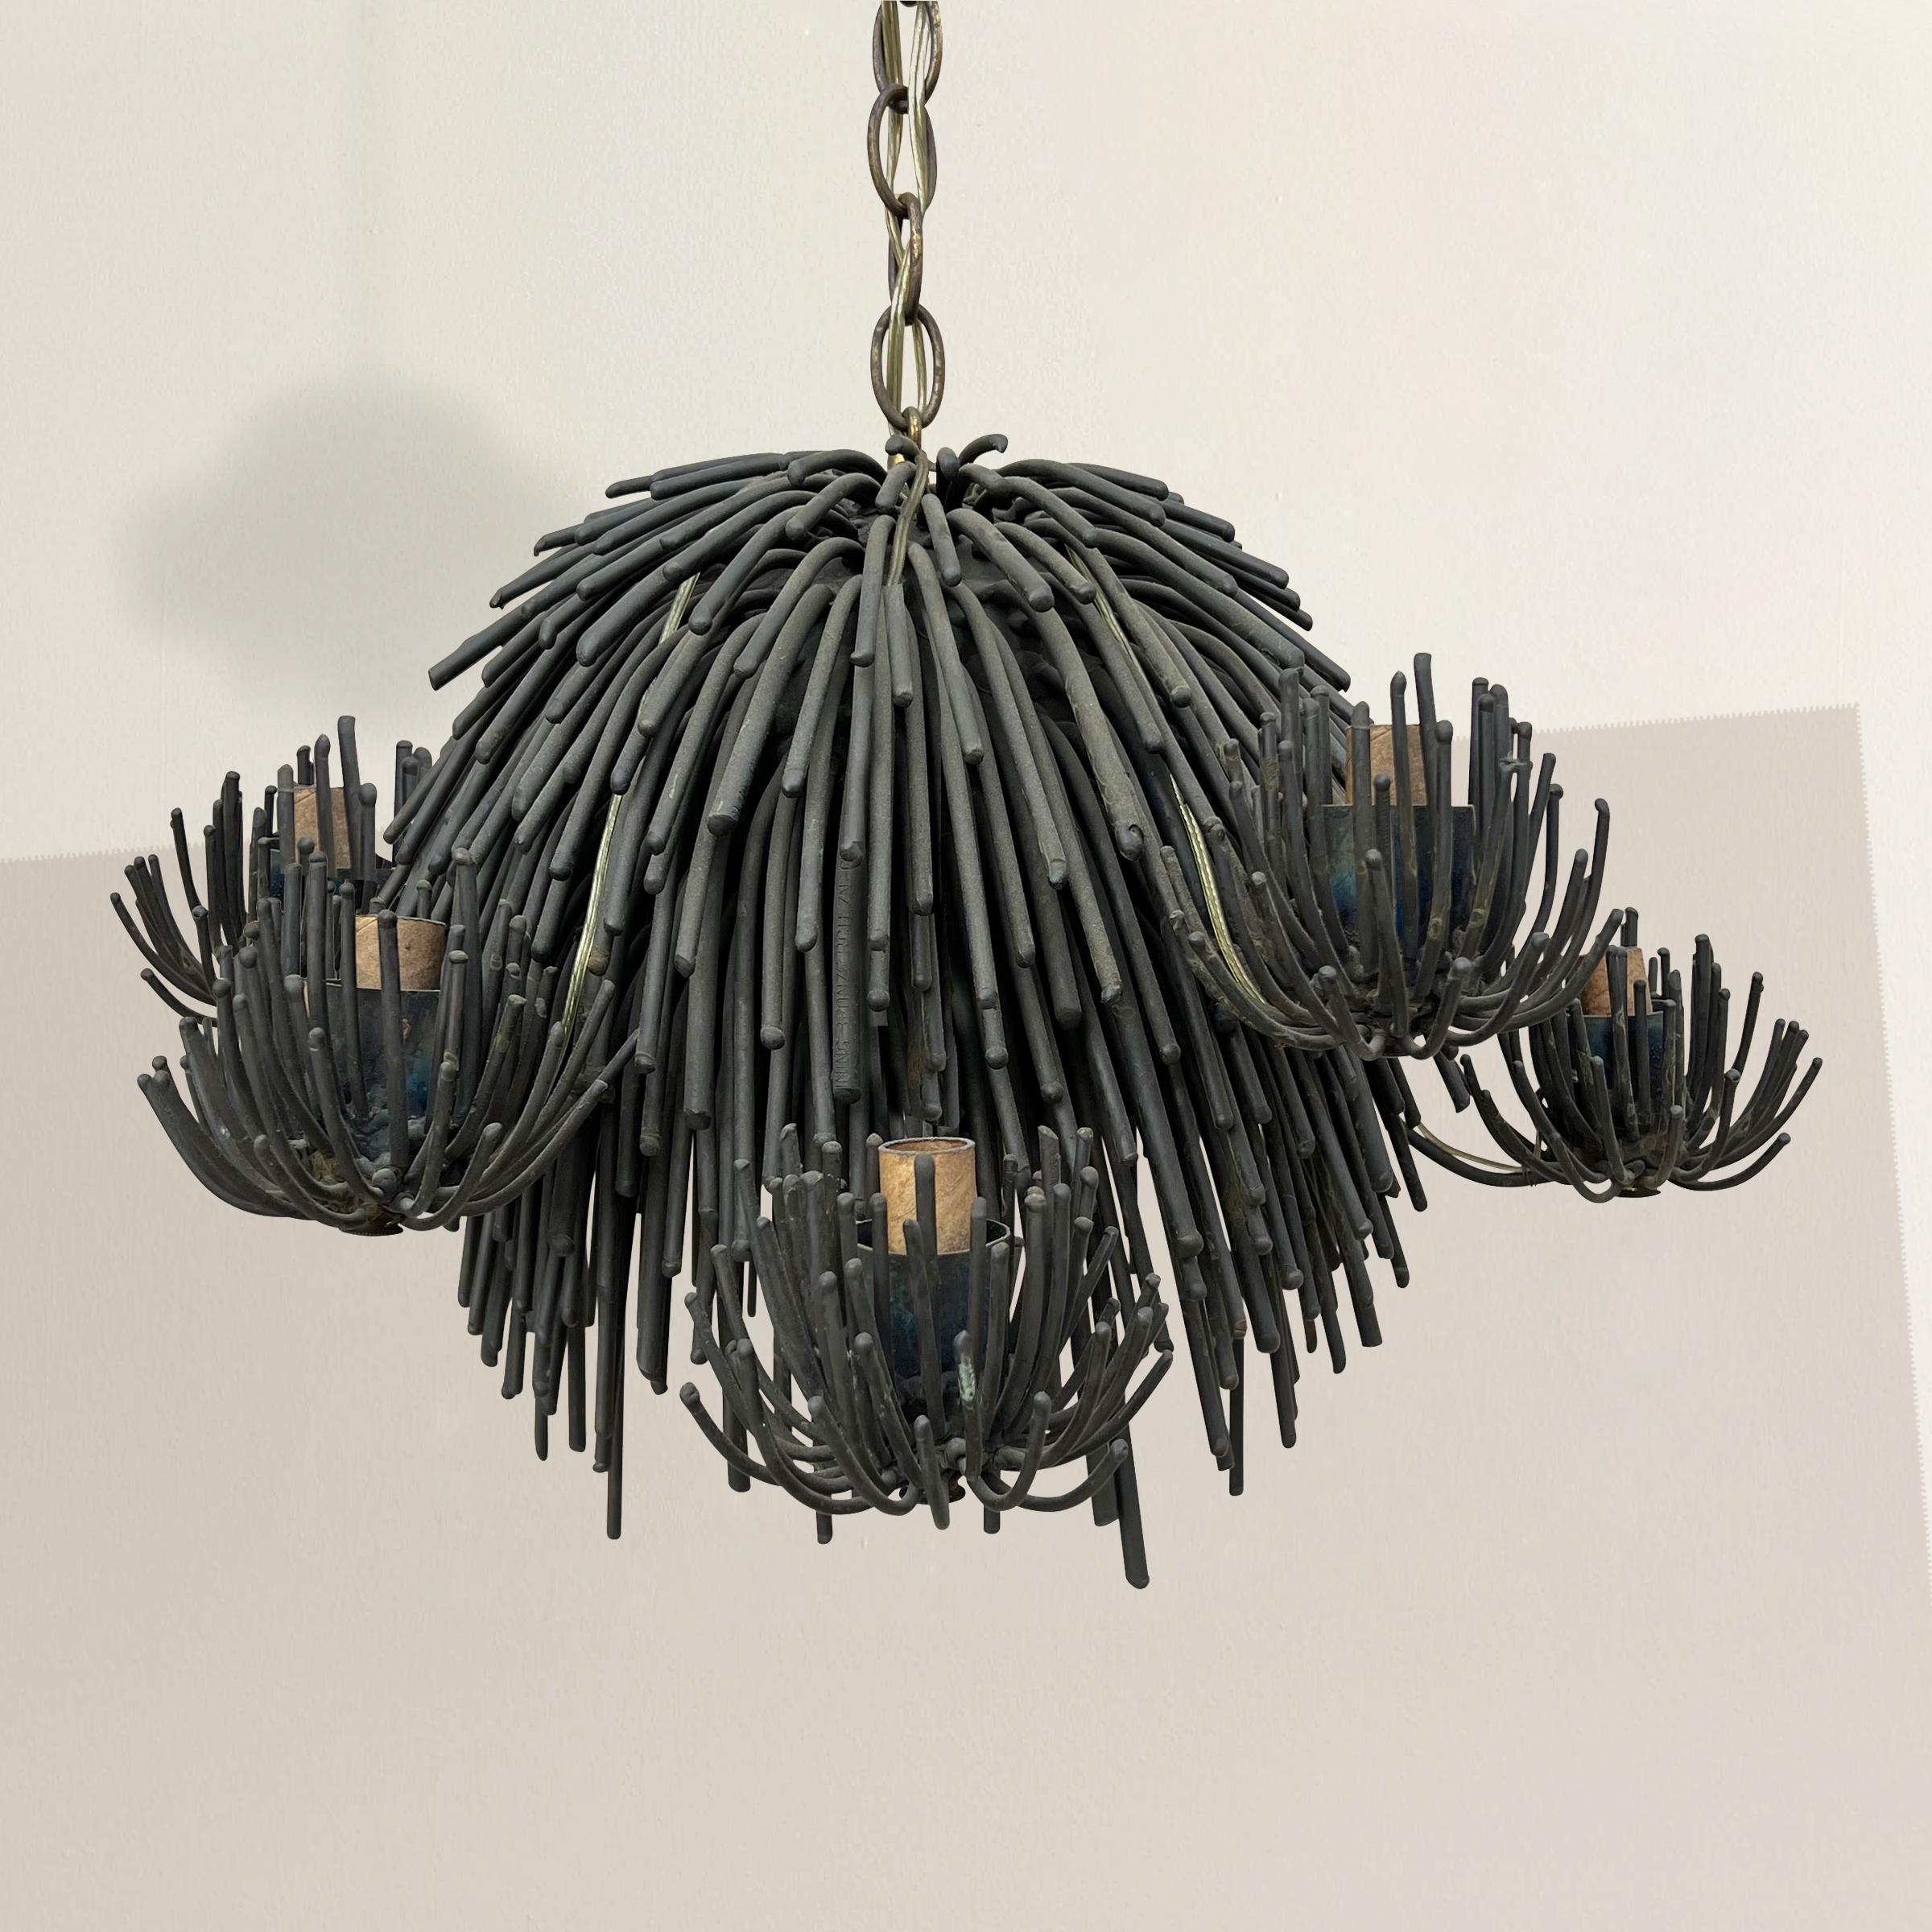 This Brutalist bronze eight-arm chandelier crafted by mid-20th century artist Belva Ball is a true testament to her innovation within the brutalist art movement. This unique masterpiece, possibly the only one of its kind, is a captivating blend of